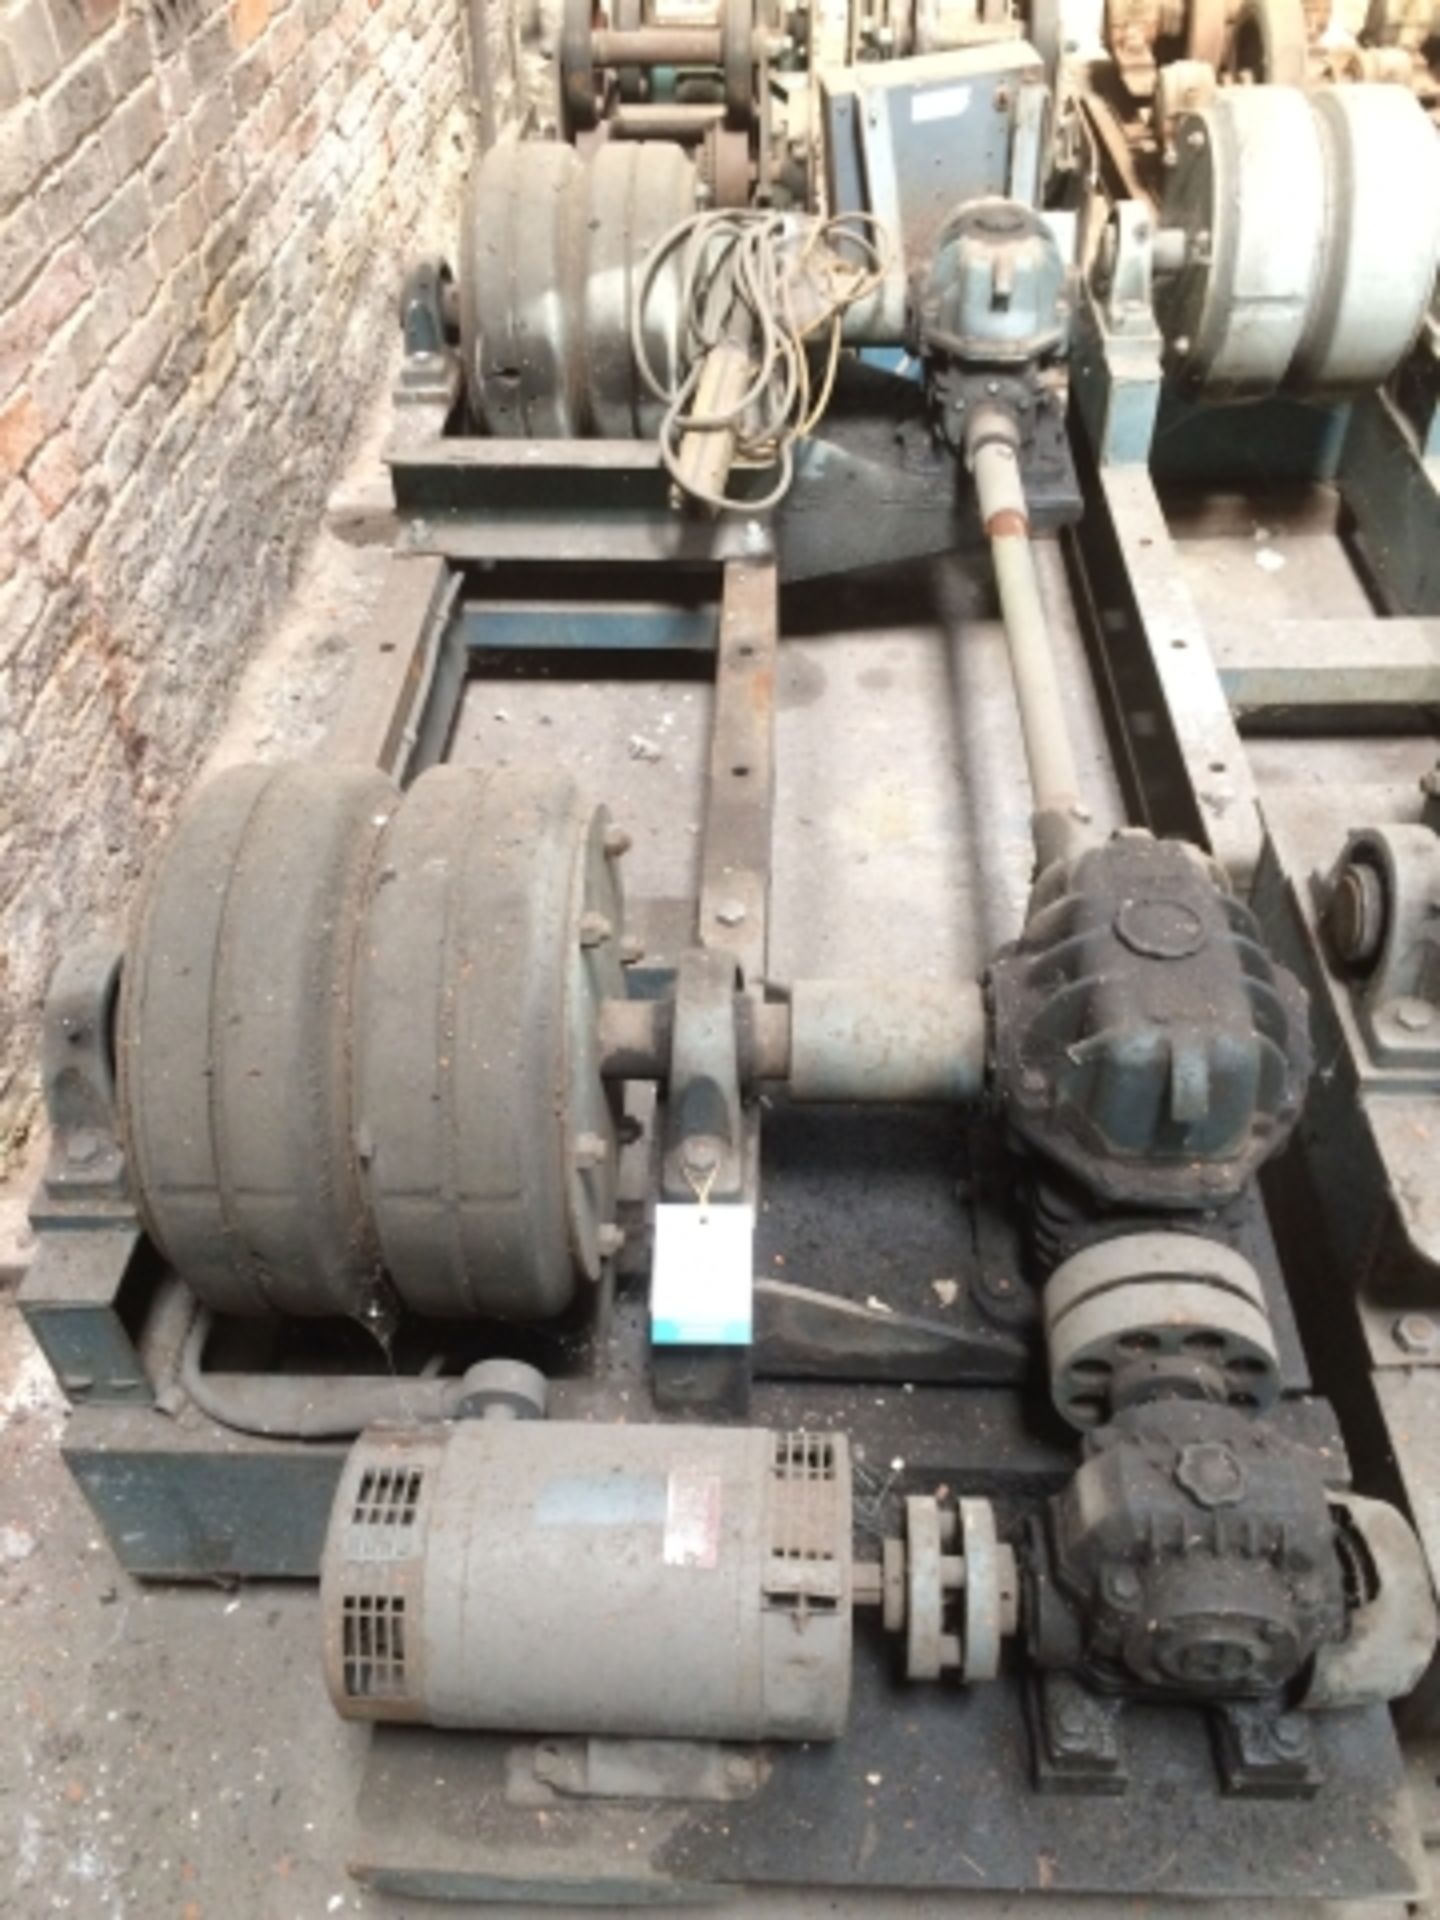 * Pair of Powered Welding Positioners and a 'Free-Wheel' pair - 18 inch diameter wheels. This lot is